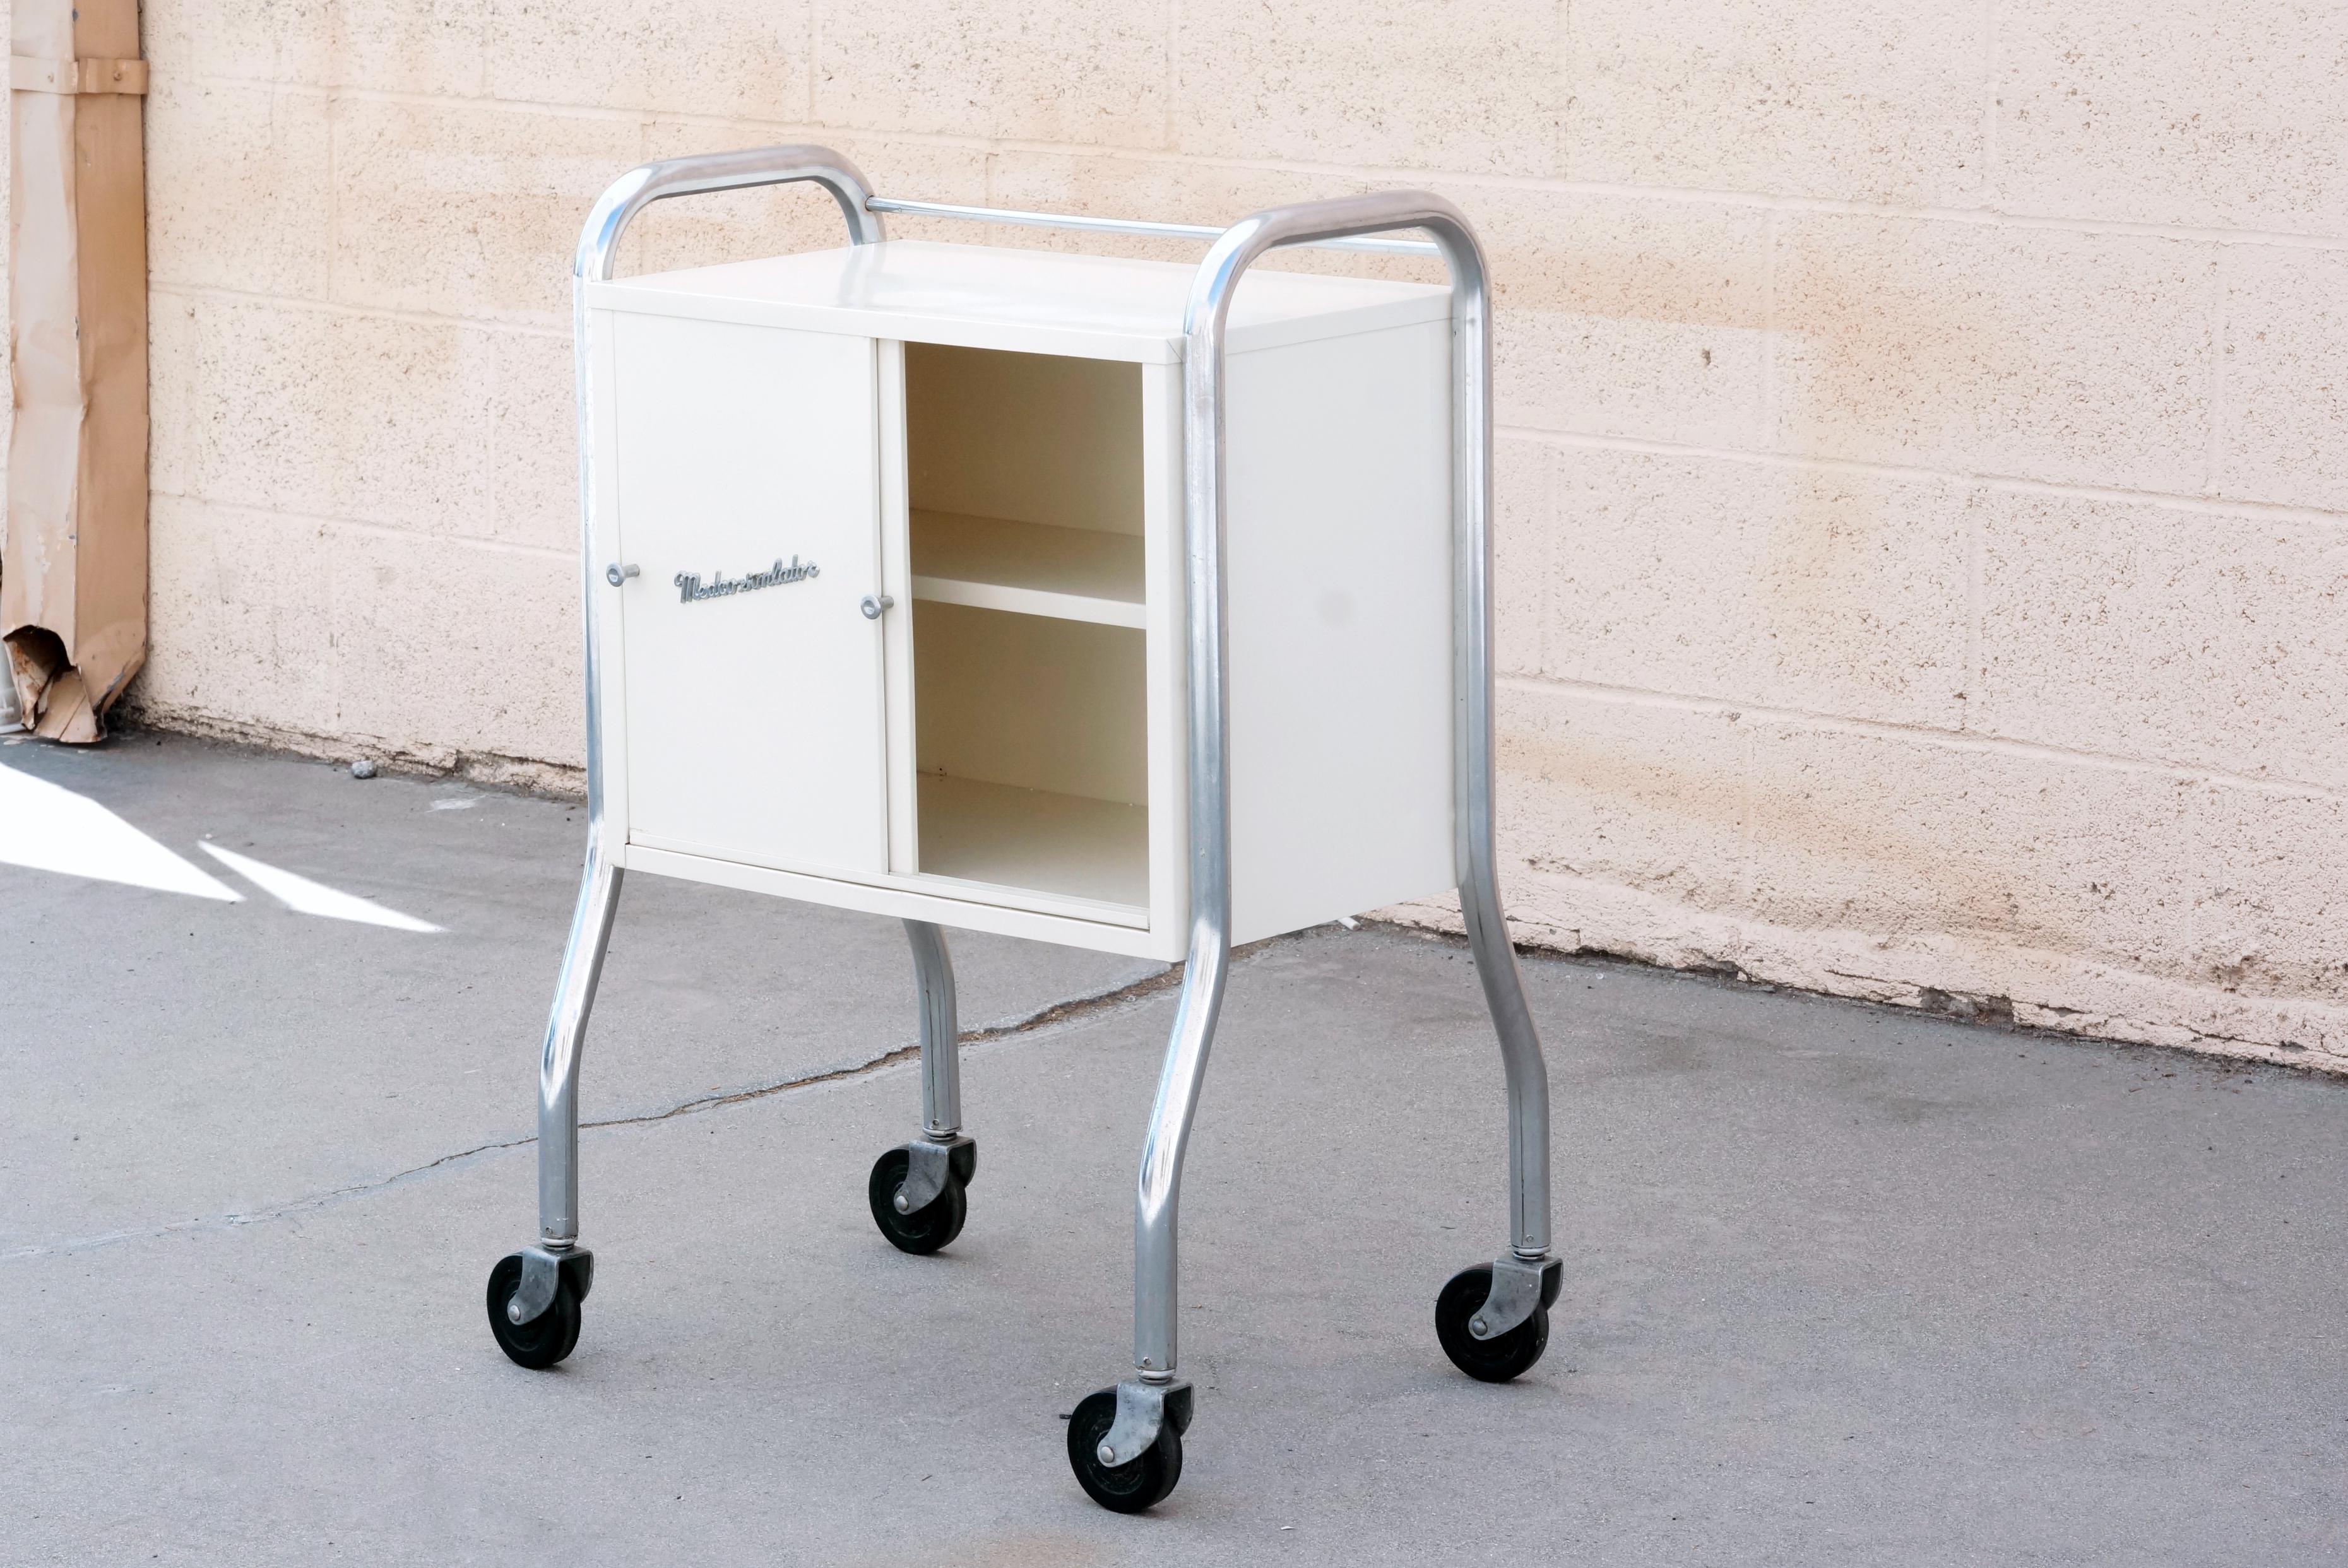 Super retro medcosonlator rolling medical cabinet. With tubular chrome frame, sliding doors, and iconic logo and original cream paint. Could make for a great little bar cart or office piece. Chrome is in original condition and shows light wear;